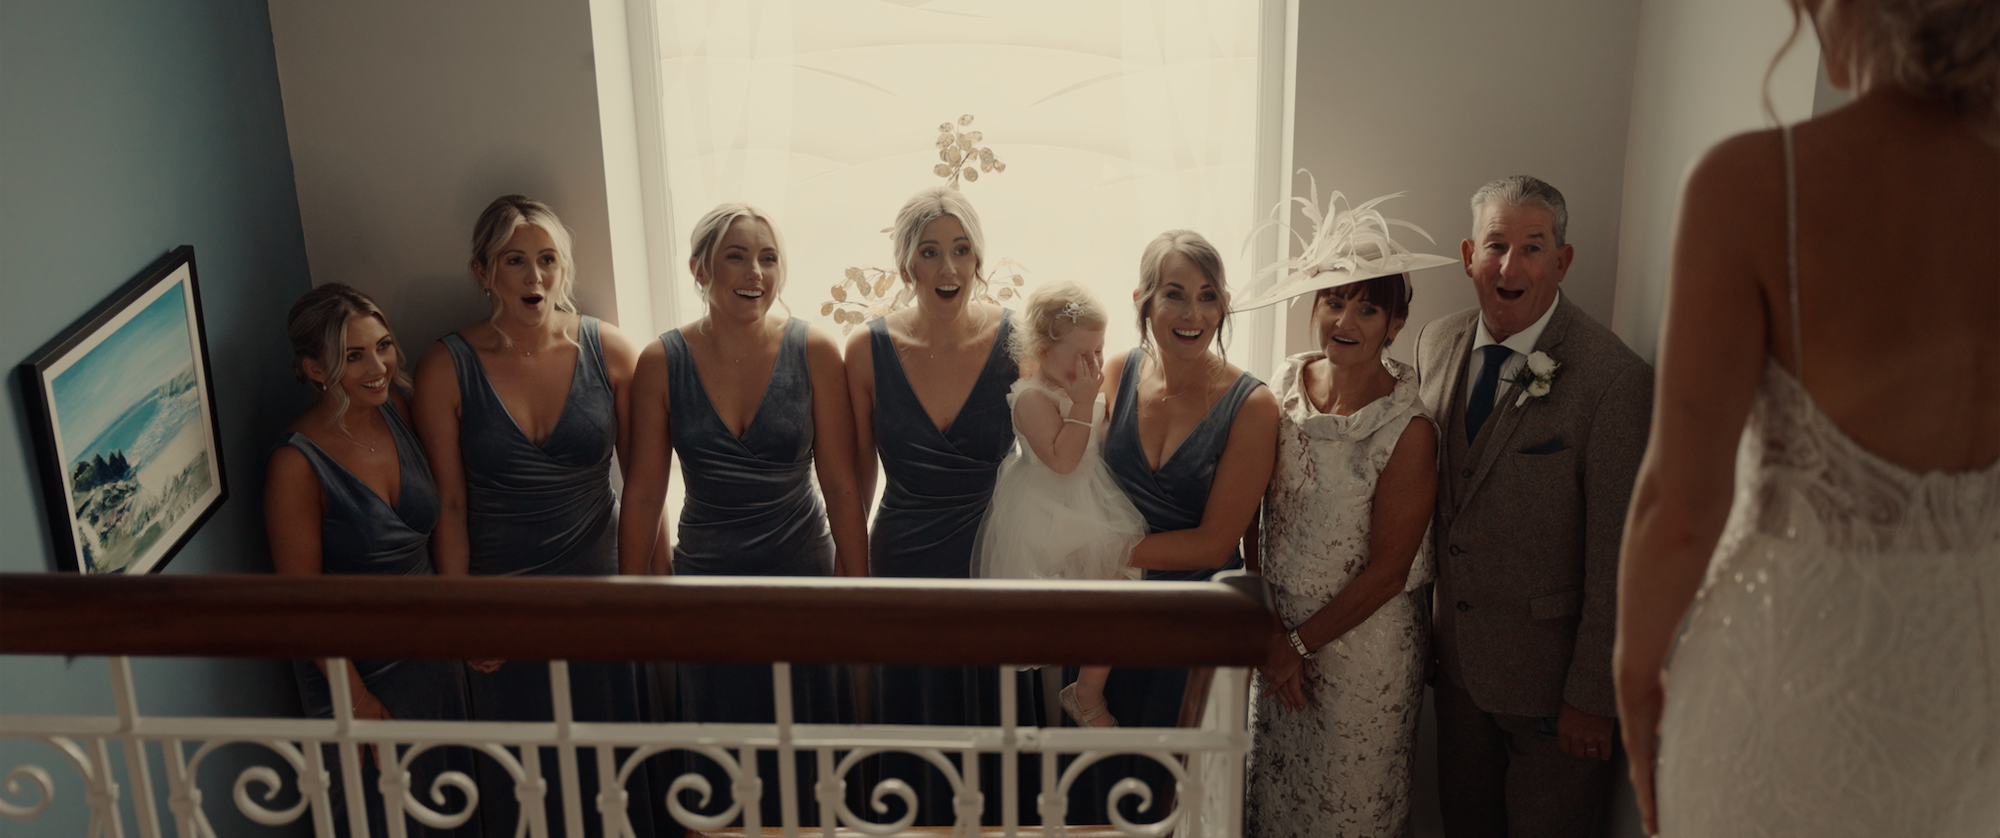 Oxwich Bay Hotel Wedding Videography by Ben Holbrook Films (Swansea South Wales).jpeg12.png